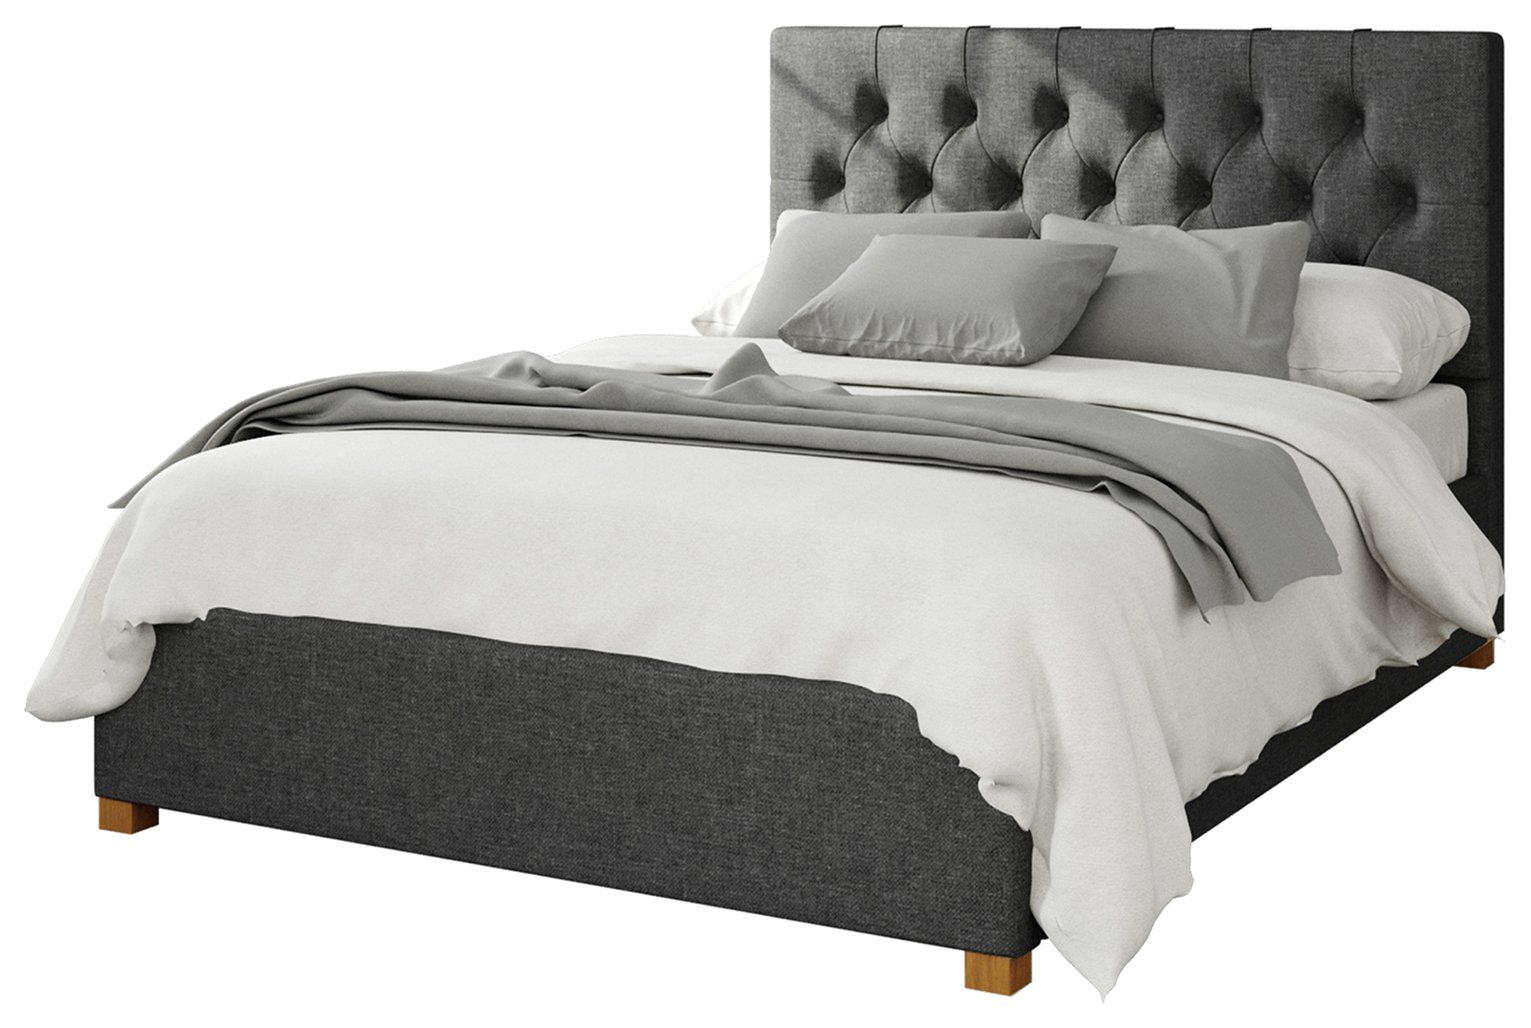 Aspire Olivier Twill Superking Ottoman Bedframe - Charcoal